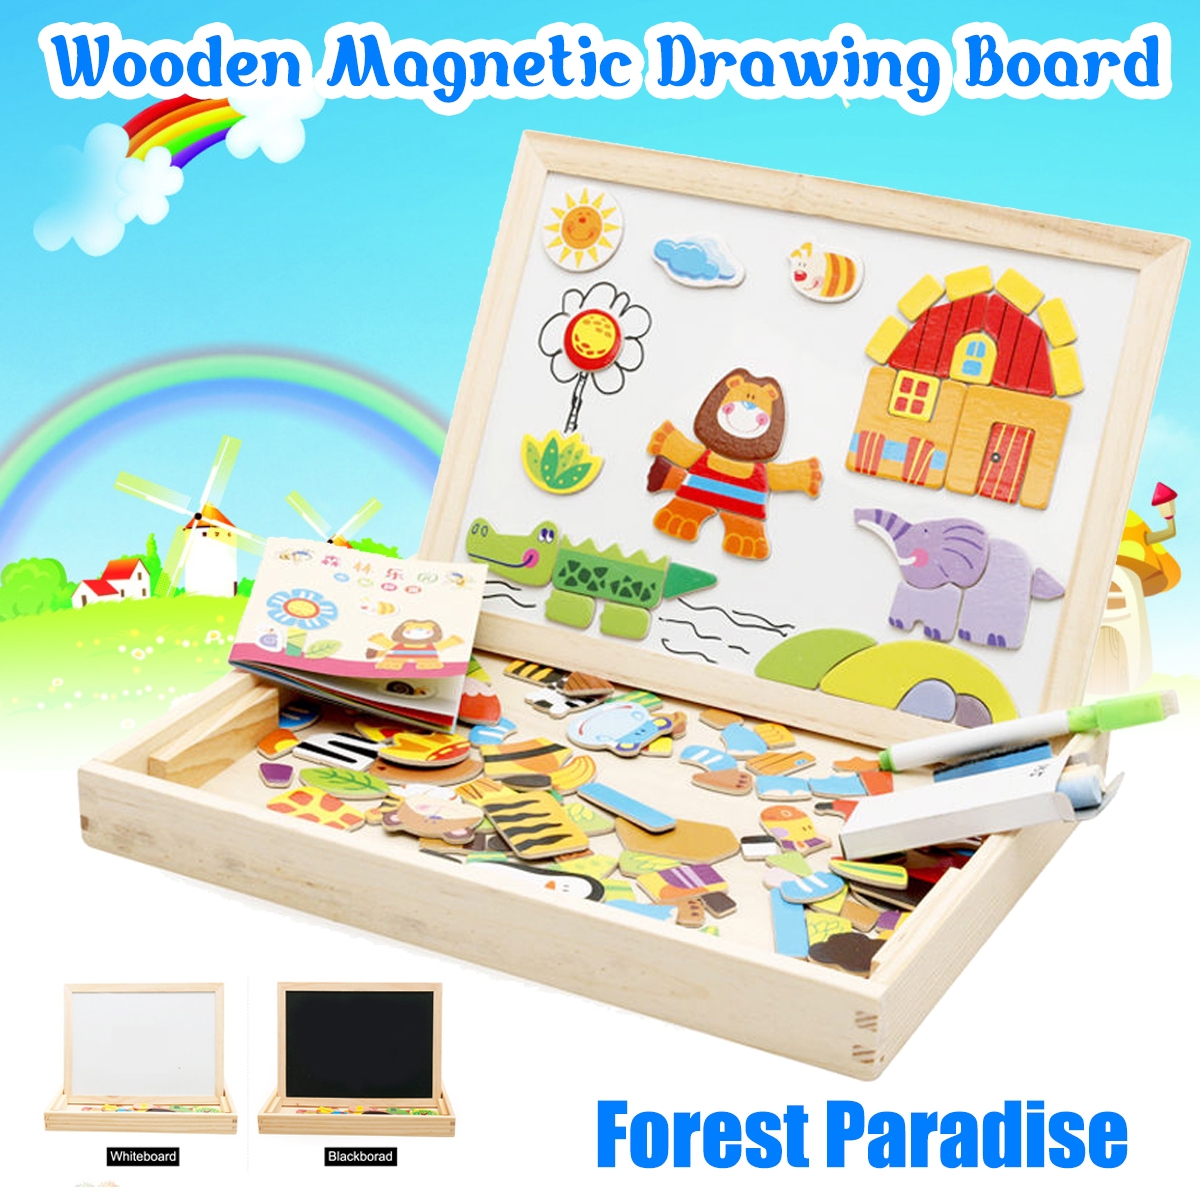 Wooden DIY Magnetic Drawing Board Forest Paradise Children's Early Educational Learning Toys